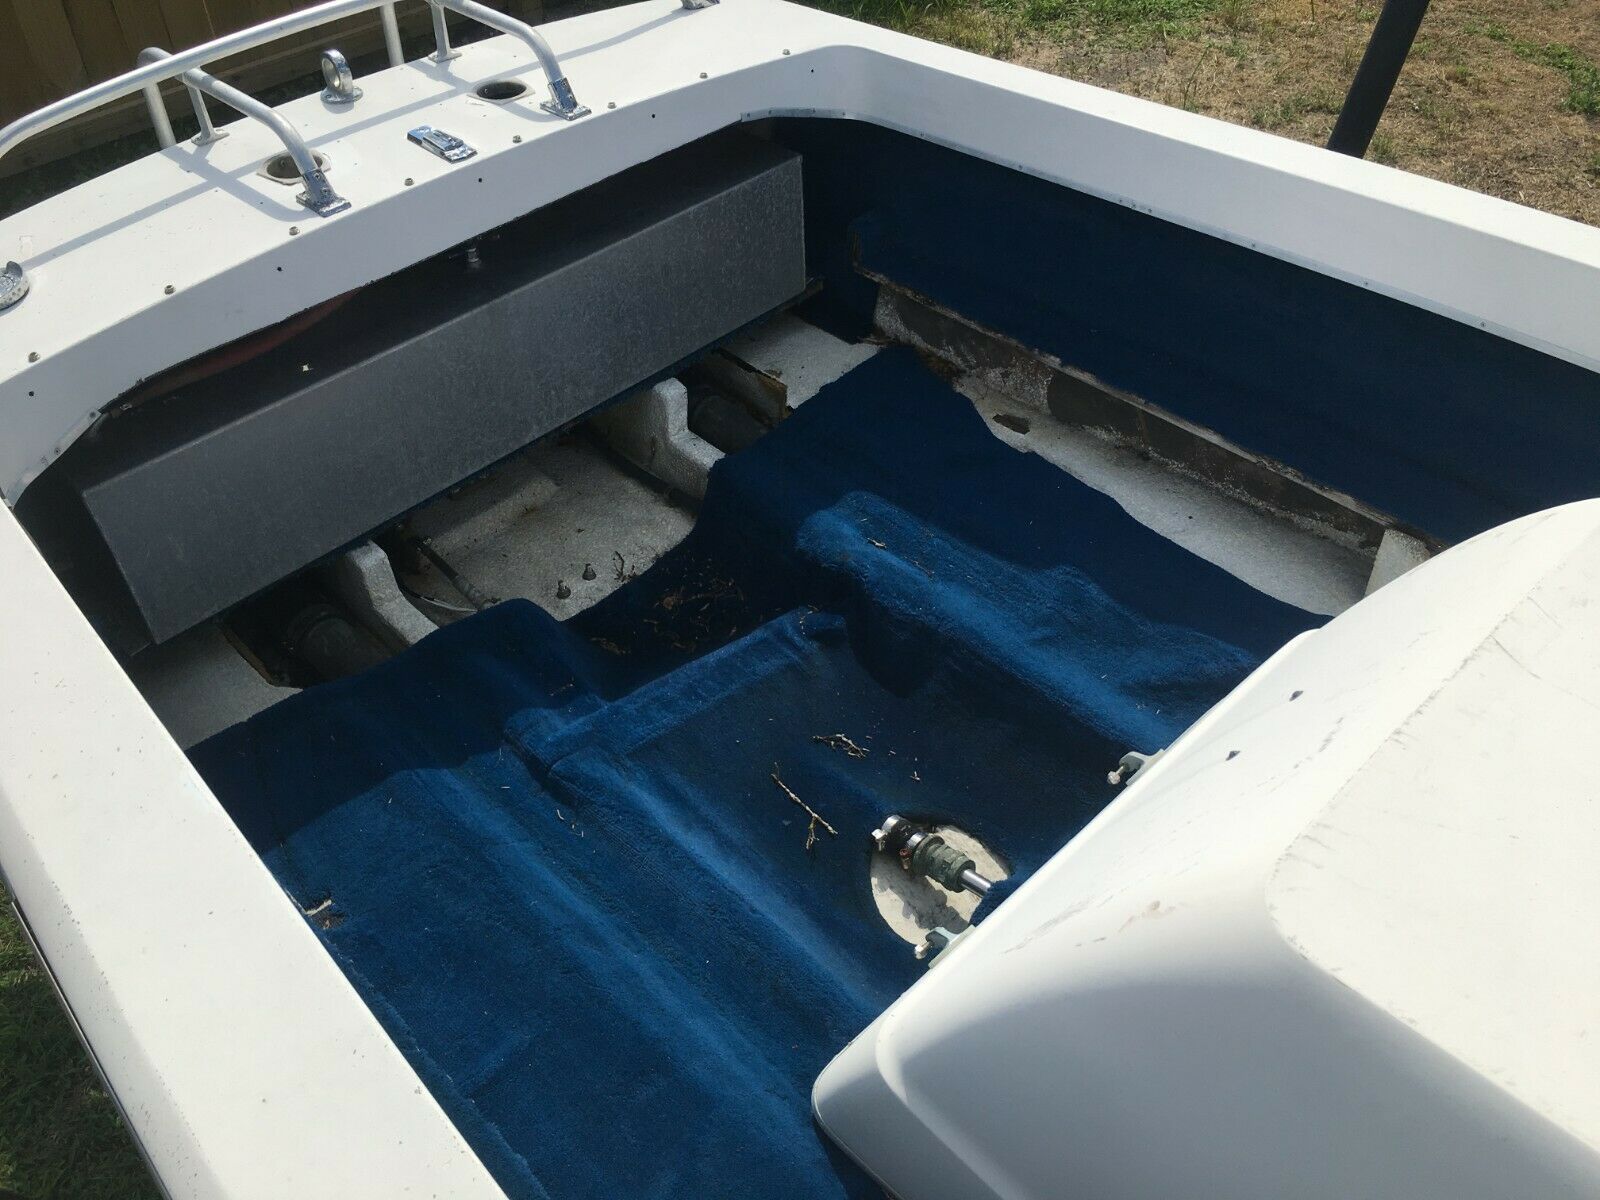 Correct Craft Ski Nautique 176 1978 for sale for $2,020 - Boats-from ...